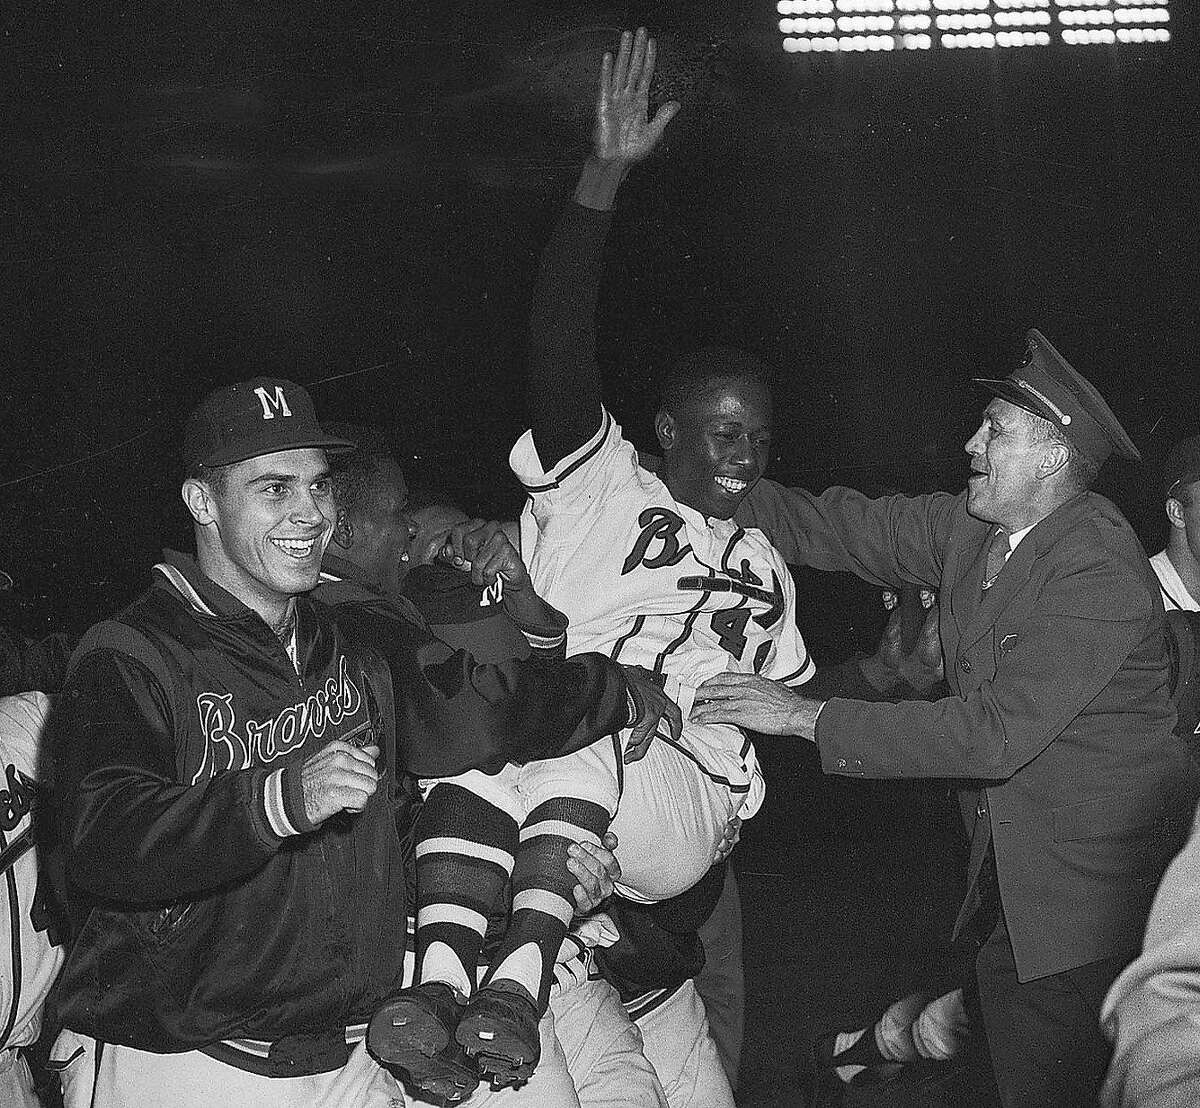 Remembering Hank Aaron beyond the home run record: One special night in 1963